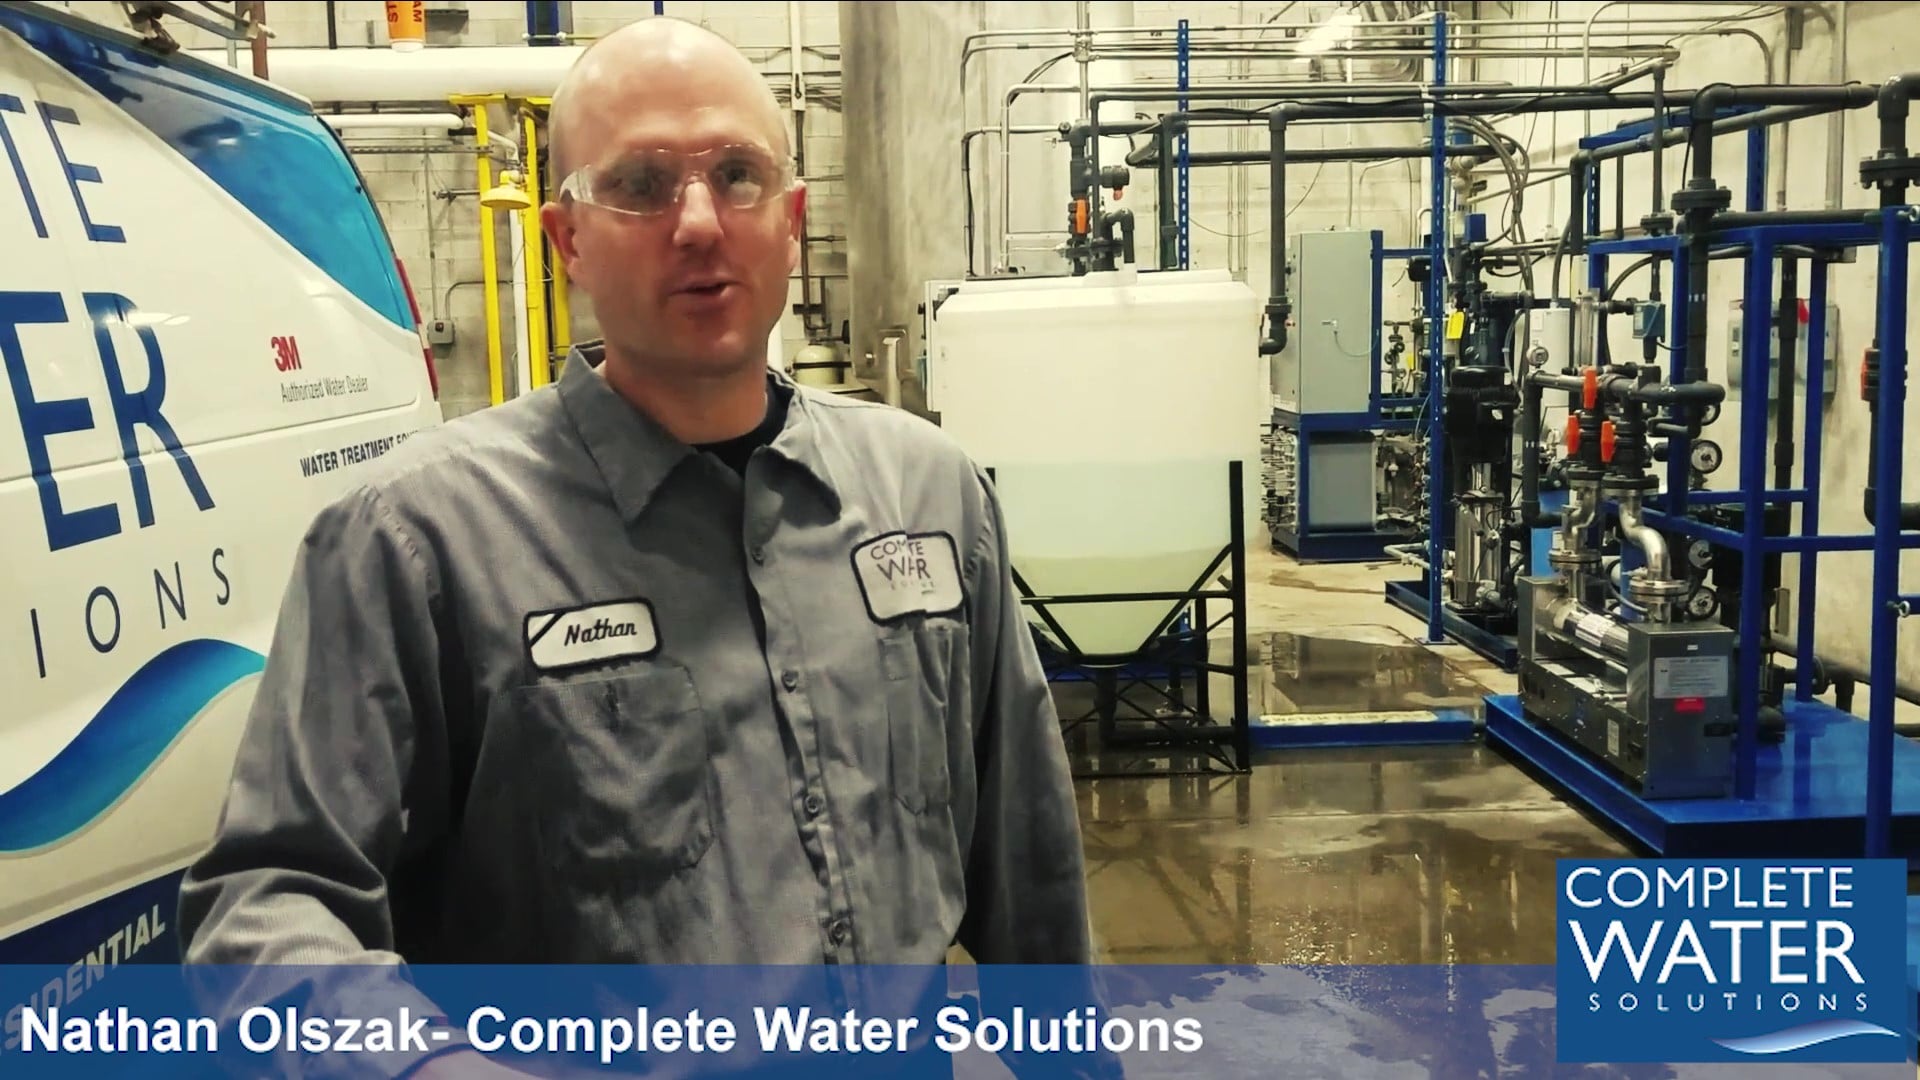 Industrial Water System Sanitization, complete water solutions